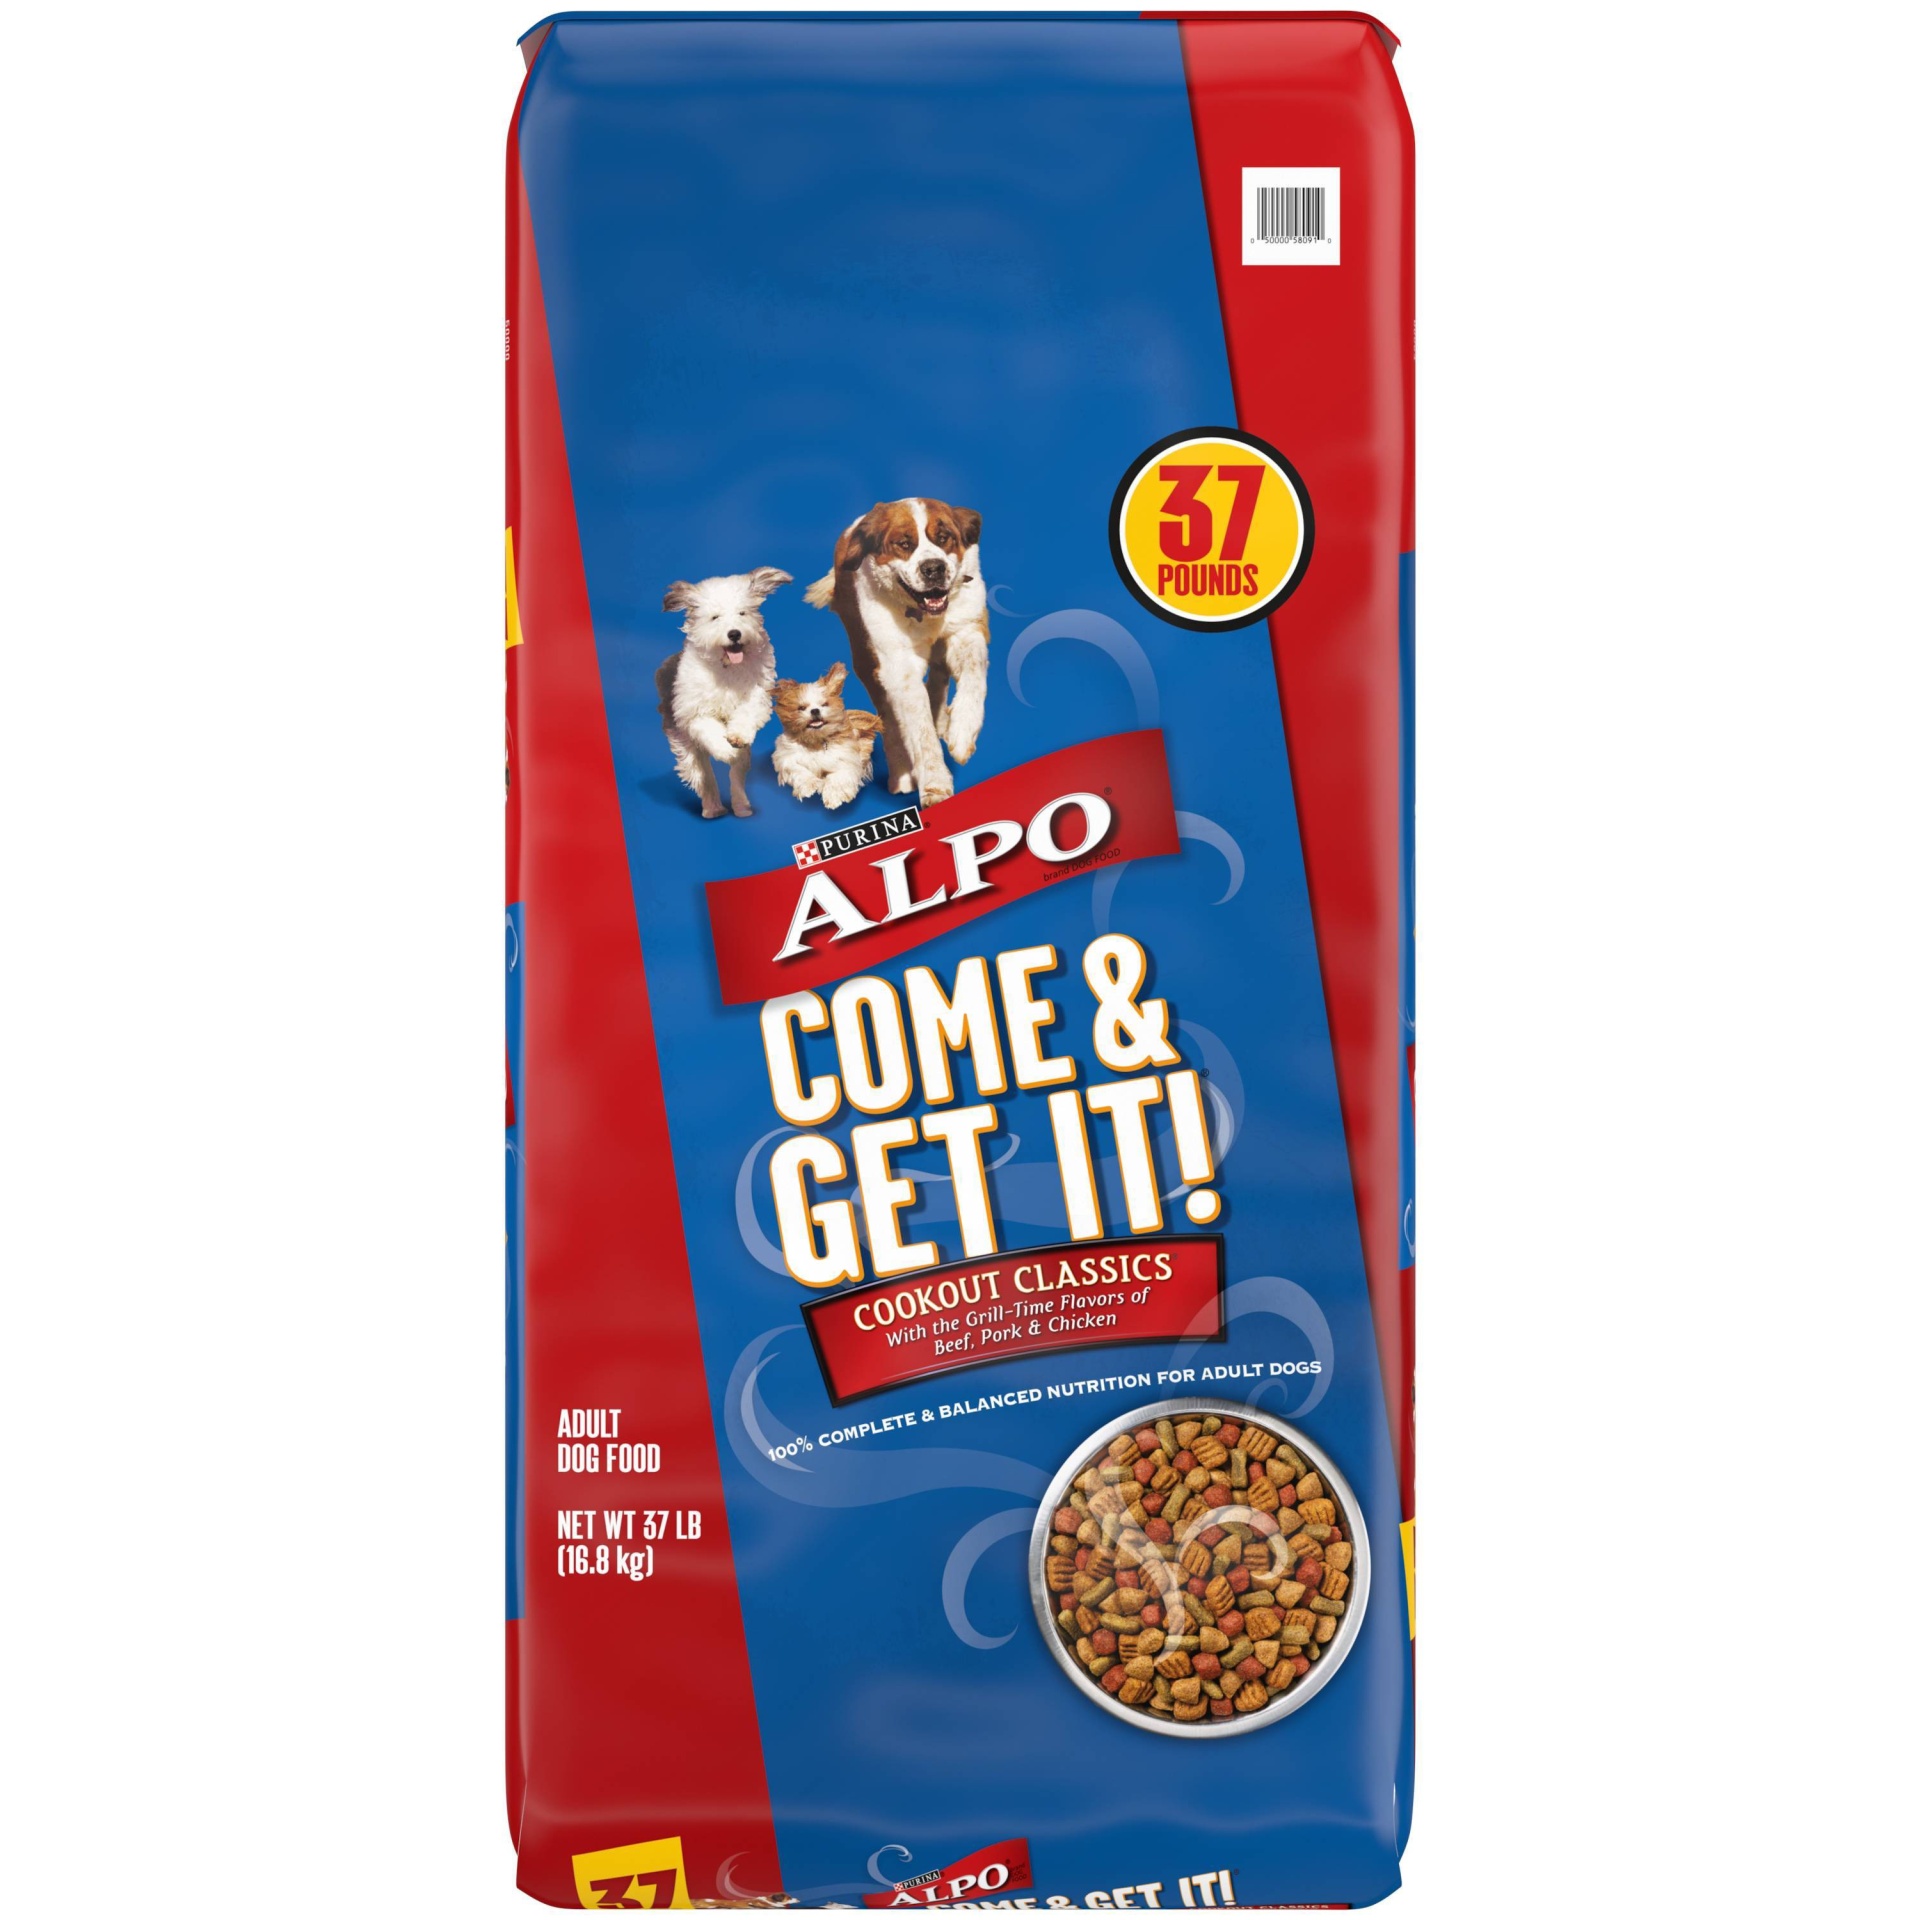 slide 1 of 3, Purina Alpo Come & Get It! Cookout Classics with Beef, Pork & Chicken Flavors Adult Complete & Balanced Dry Dog Food - 37lbs, 37 lb